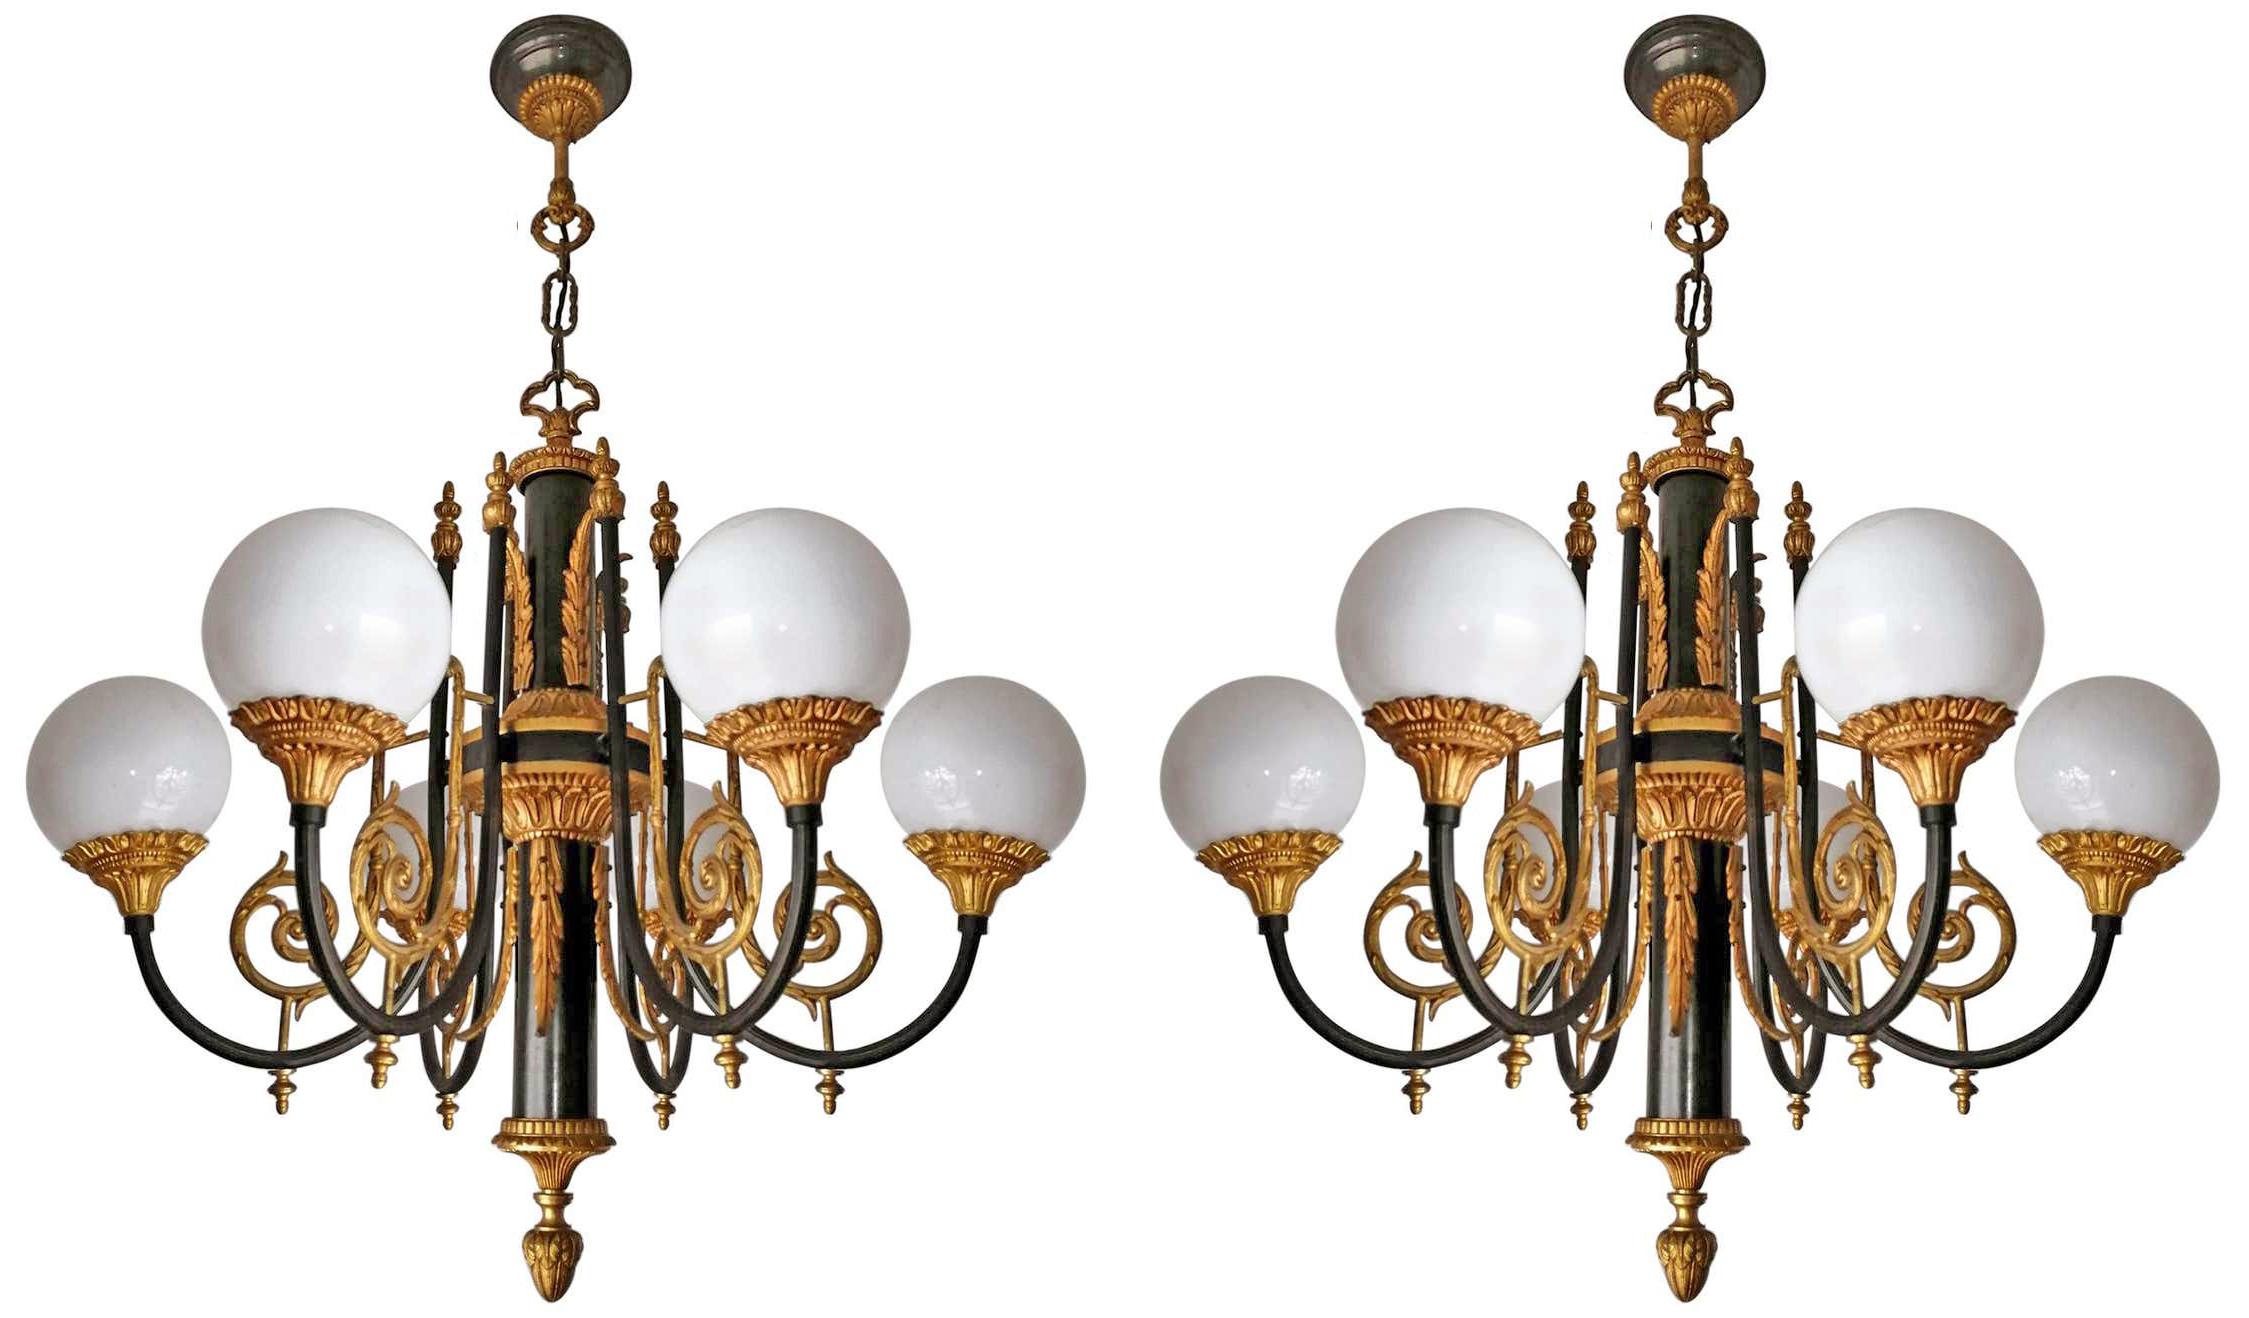 Spectacular Pair of neoclassical French Empire gilt bronze 6-light chandelier, patina and gold-plated solid bronze and Opaline Globe

Dimensions:
Height 39.38 in. (100 cm)
Diameter 27.56 in. (70 cm)
Glass shades, 6 in (15 cm)
6-light bulbs E